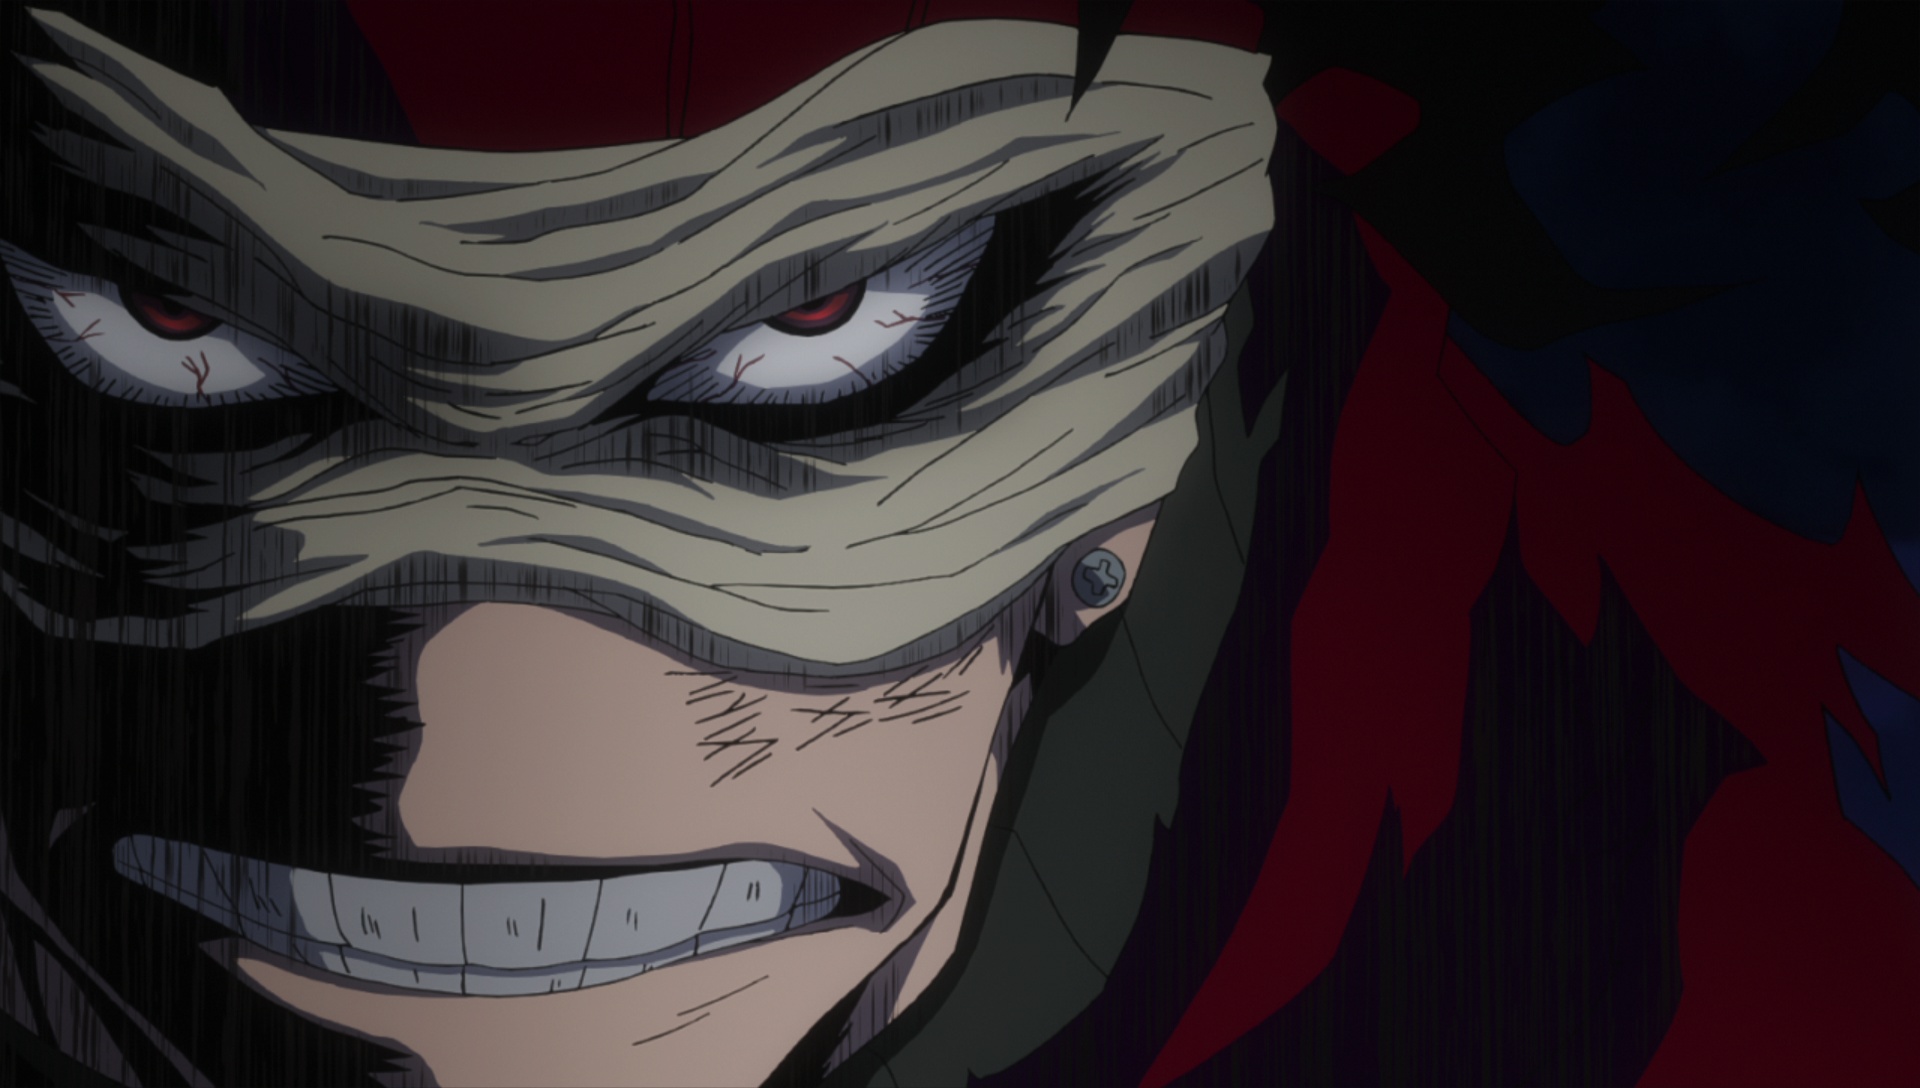 Stain My Hero Academia : My Hero Academia Stain Confirmed for Season 2, Go Inoue ... - Here are 10 things that don't make sense about him.